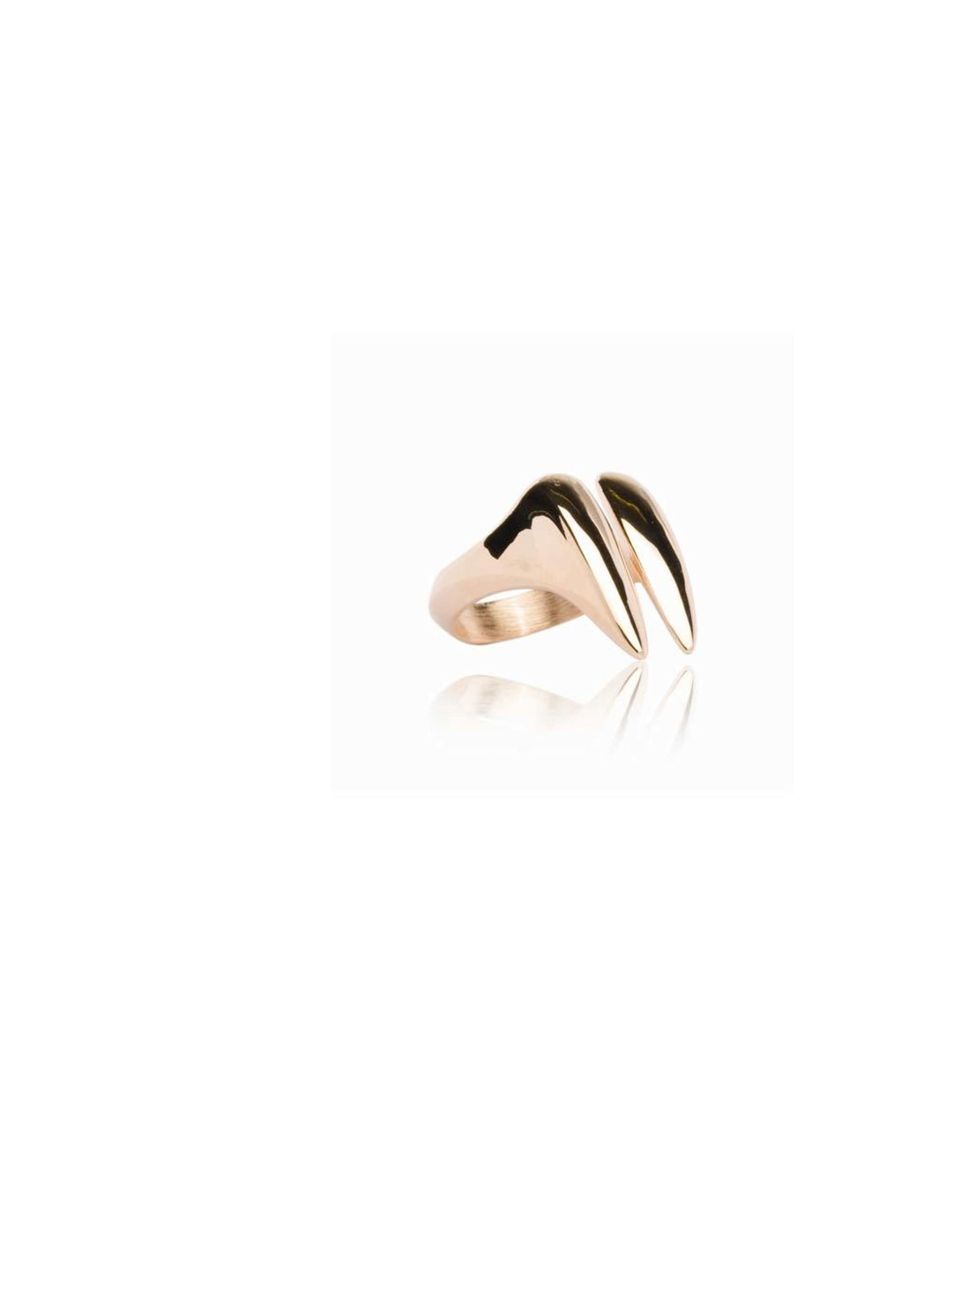 <p>We love the quirky fang design of this rose gold vermeil ring; it's classic, but with an edge - a real forever piece... <a href="http://www.katie-rowland.com/lilith-fang-ring-p/lil15r.htm">Katie Rowland</a> ring, £160</p>